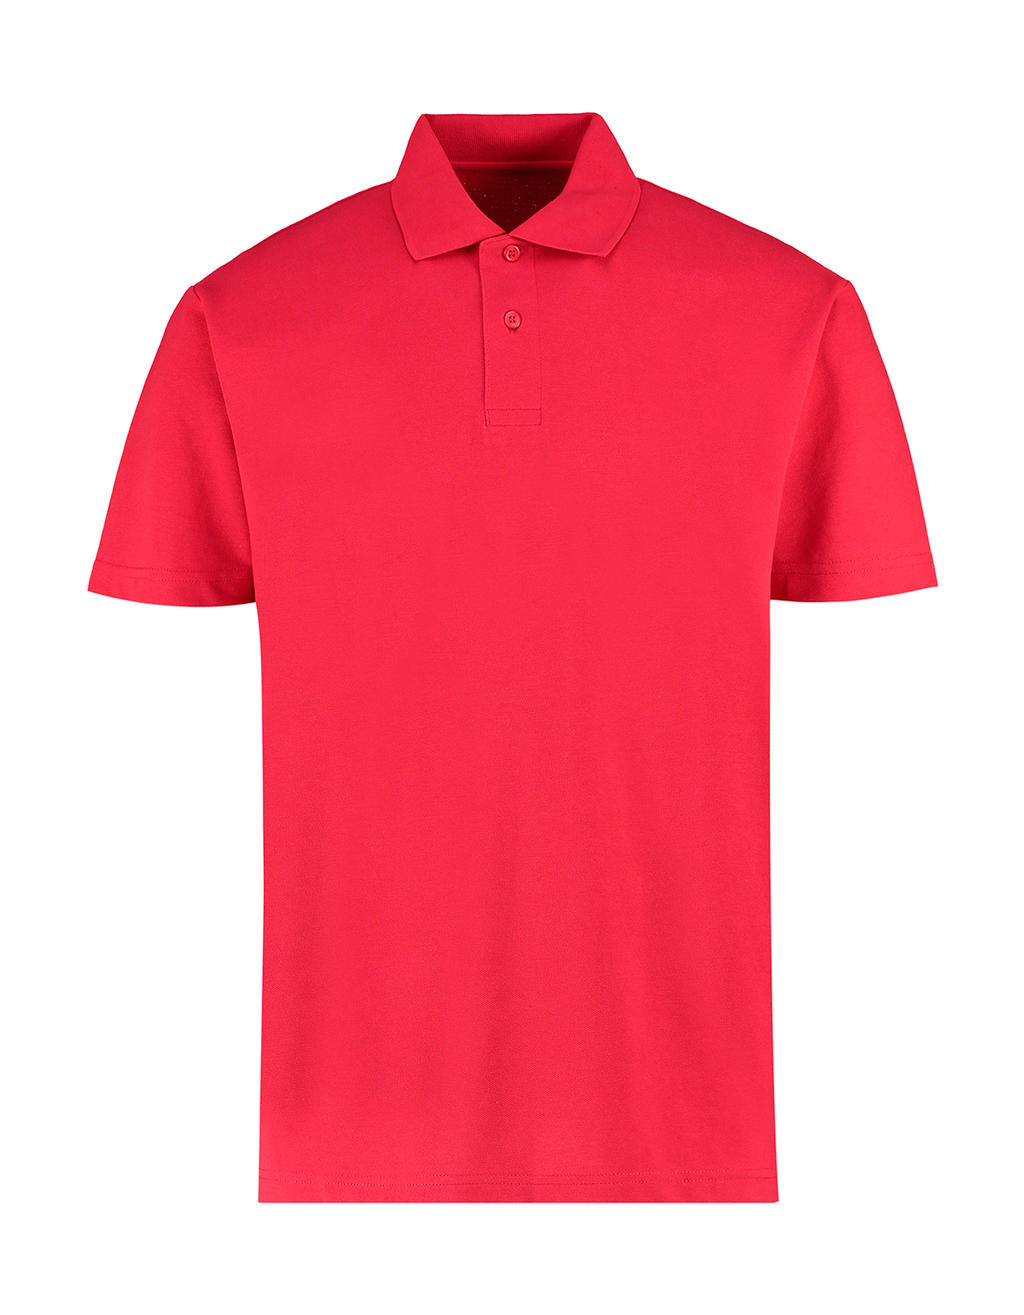  Mens Regular Fit Workforce Polo in Farbe Red